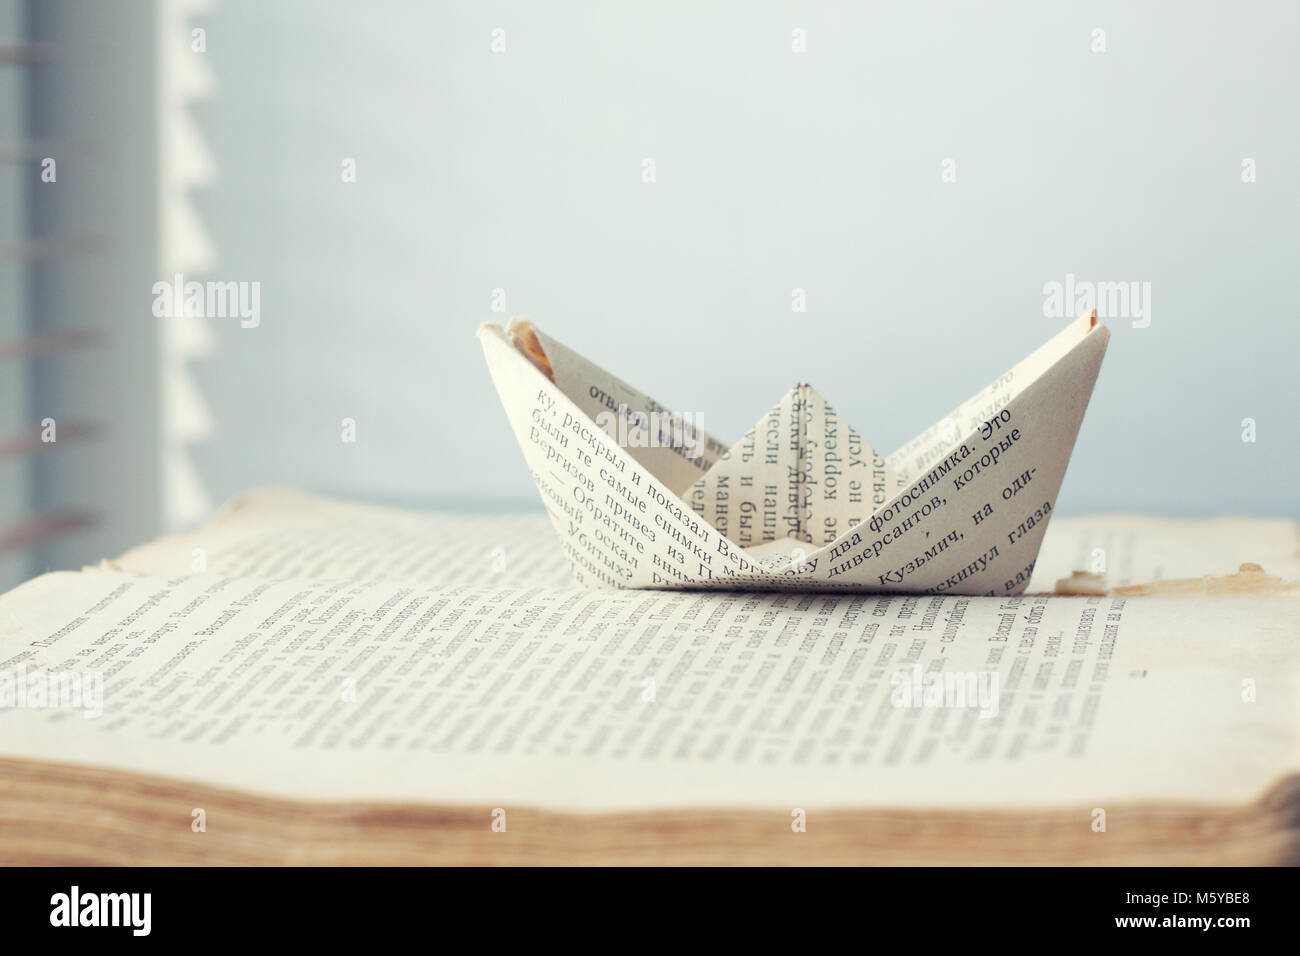 a paper ship is sent to the path of knowledge and words on sea book background editorial Stock Photo